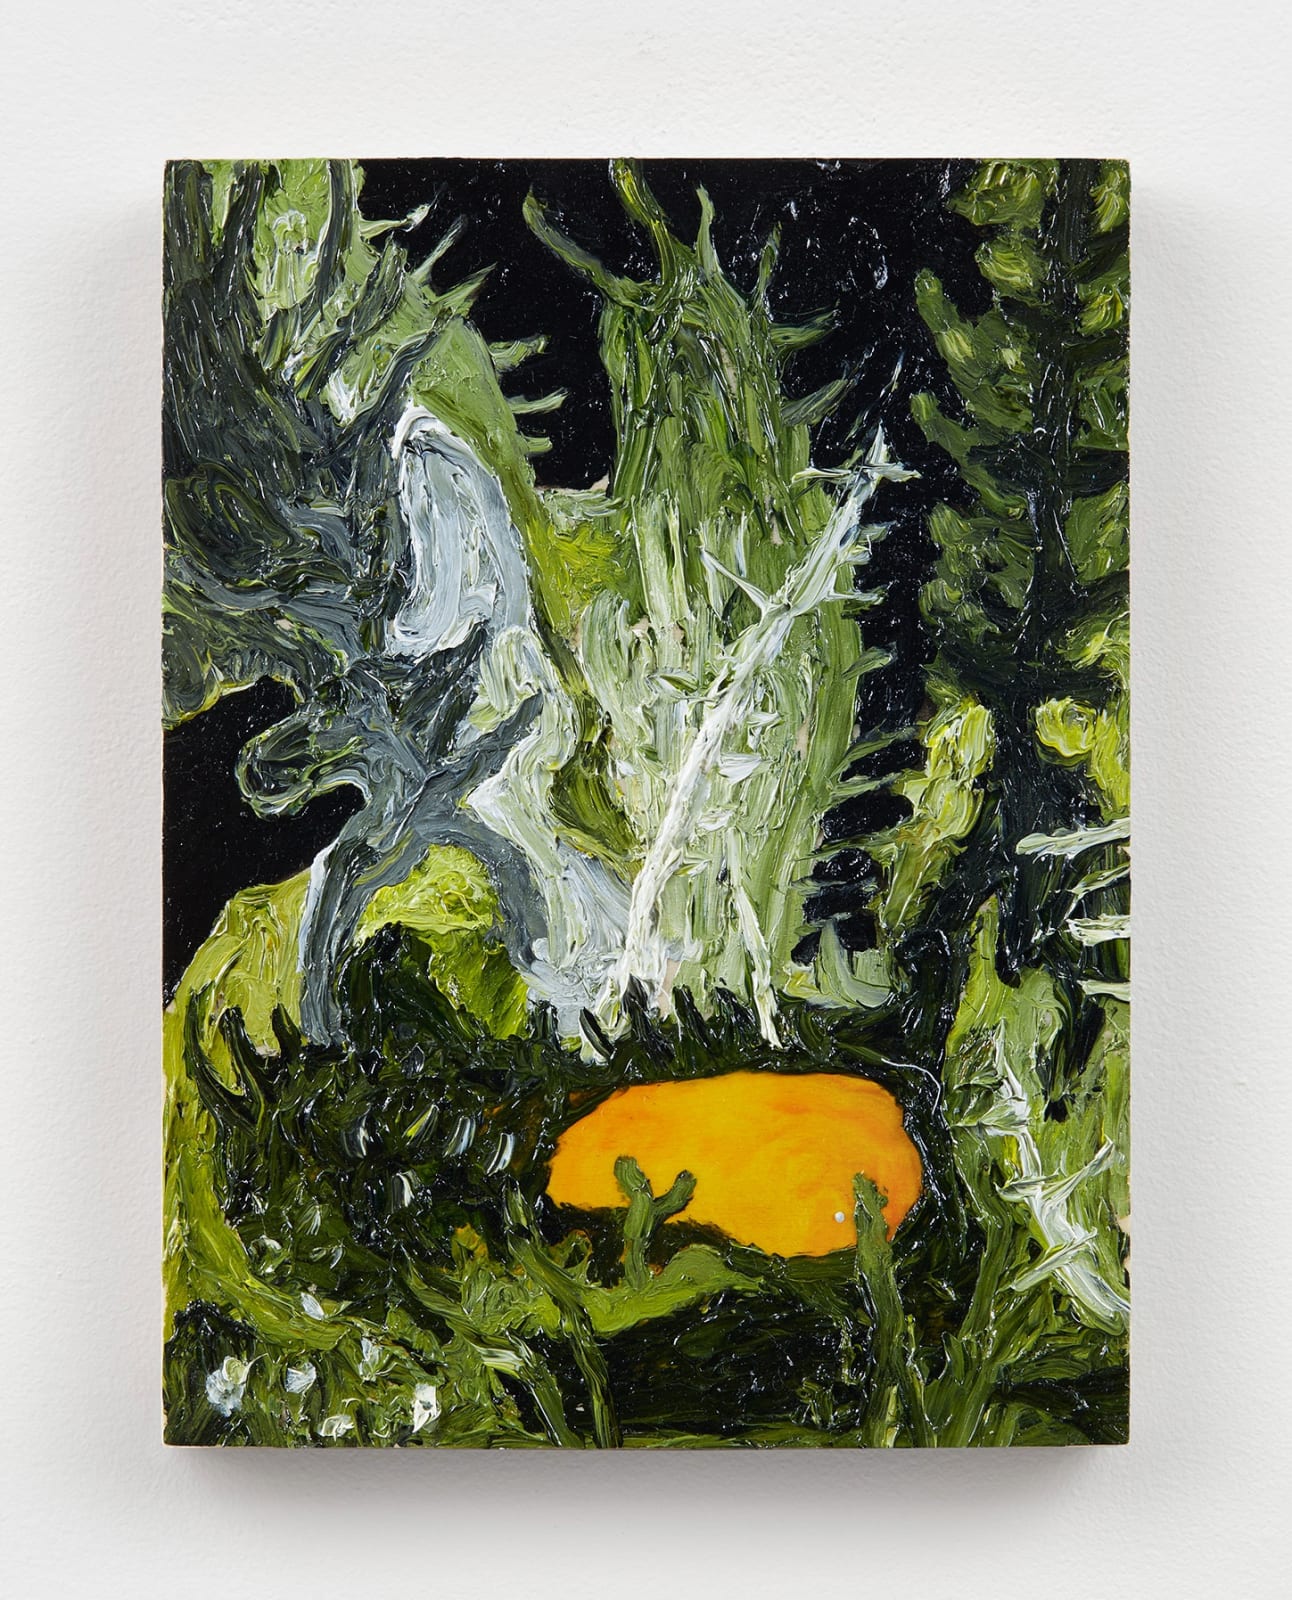 Thicket #1, 2021 Oil on wood panel 8 x 6 in. (20.3 x 15.2 cm.) (ML 45) SOLD